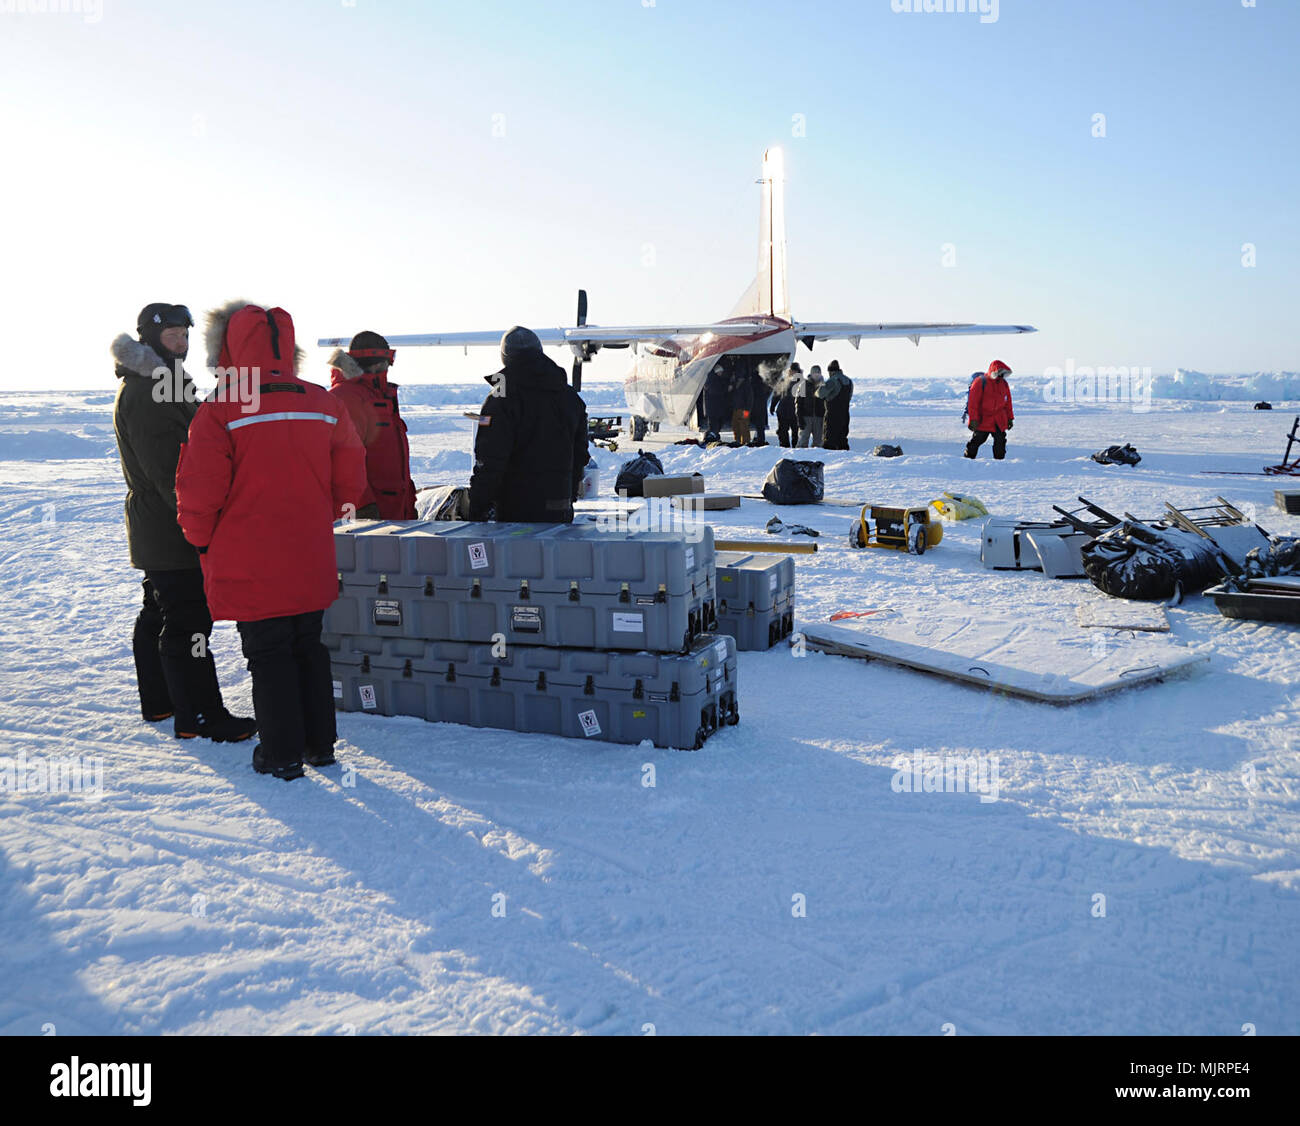 BEAUFORT SEA (March 21, 2018) Personnel at Ice Camp Skate load equipment onboard aircraft in preparation for camp breakdown during Ice Exercise (ICEX) 2018. ICEX 2018 is a five-week exercise that allows the Navy to assess its operational readiness in the Arctic, increase experience in the region, advance understanding of the Arctic environment, and continue to develop relationships with other services, allies and partner organizations. Armed Forces and civilians displaying courage bravery dedication commitment and sacrifice Stock Photo